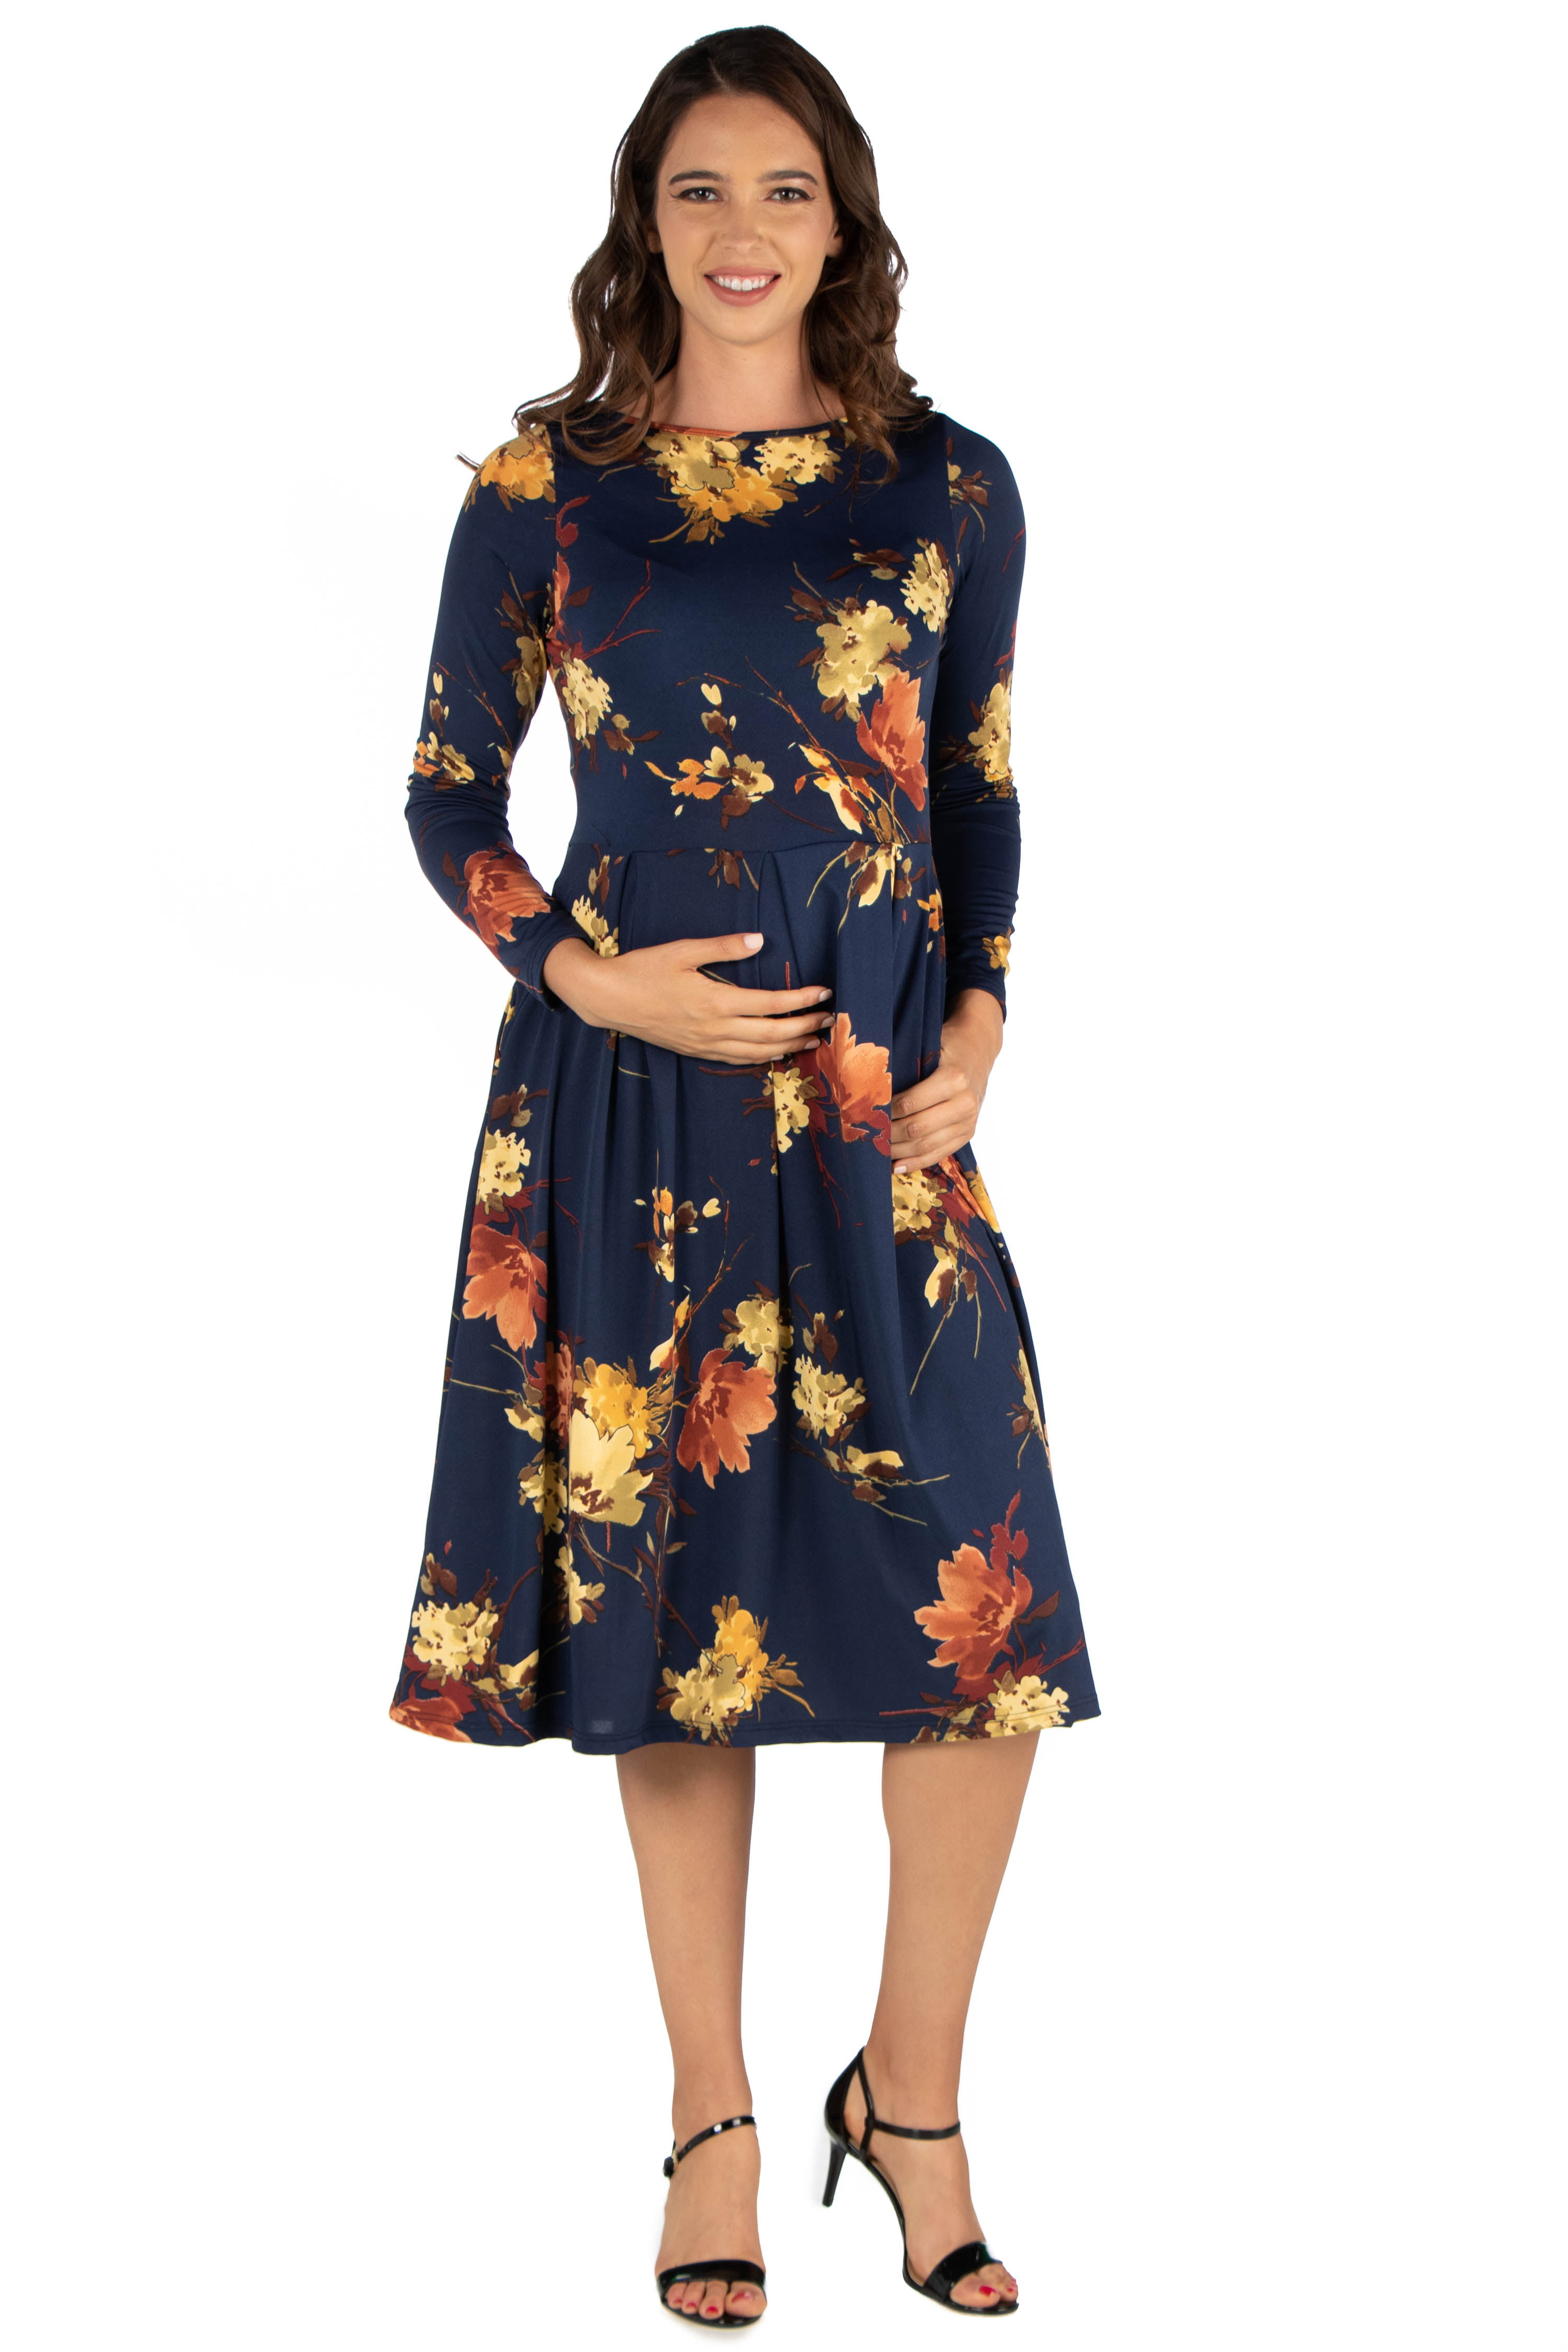 24/7 Comfort Apparel Floral Long Sleeve Fit N Flare Maternity Midi ...